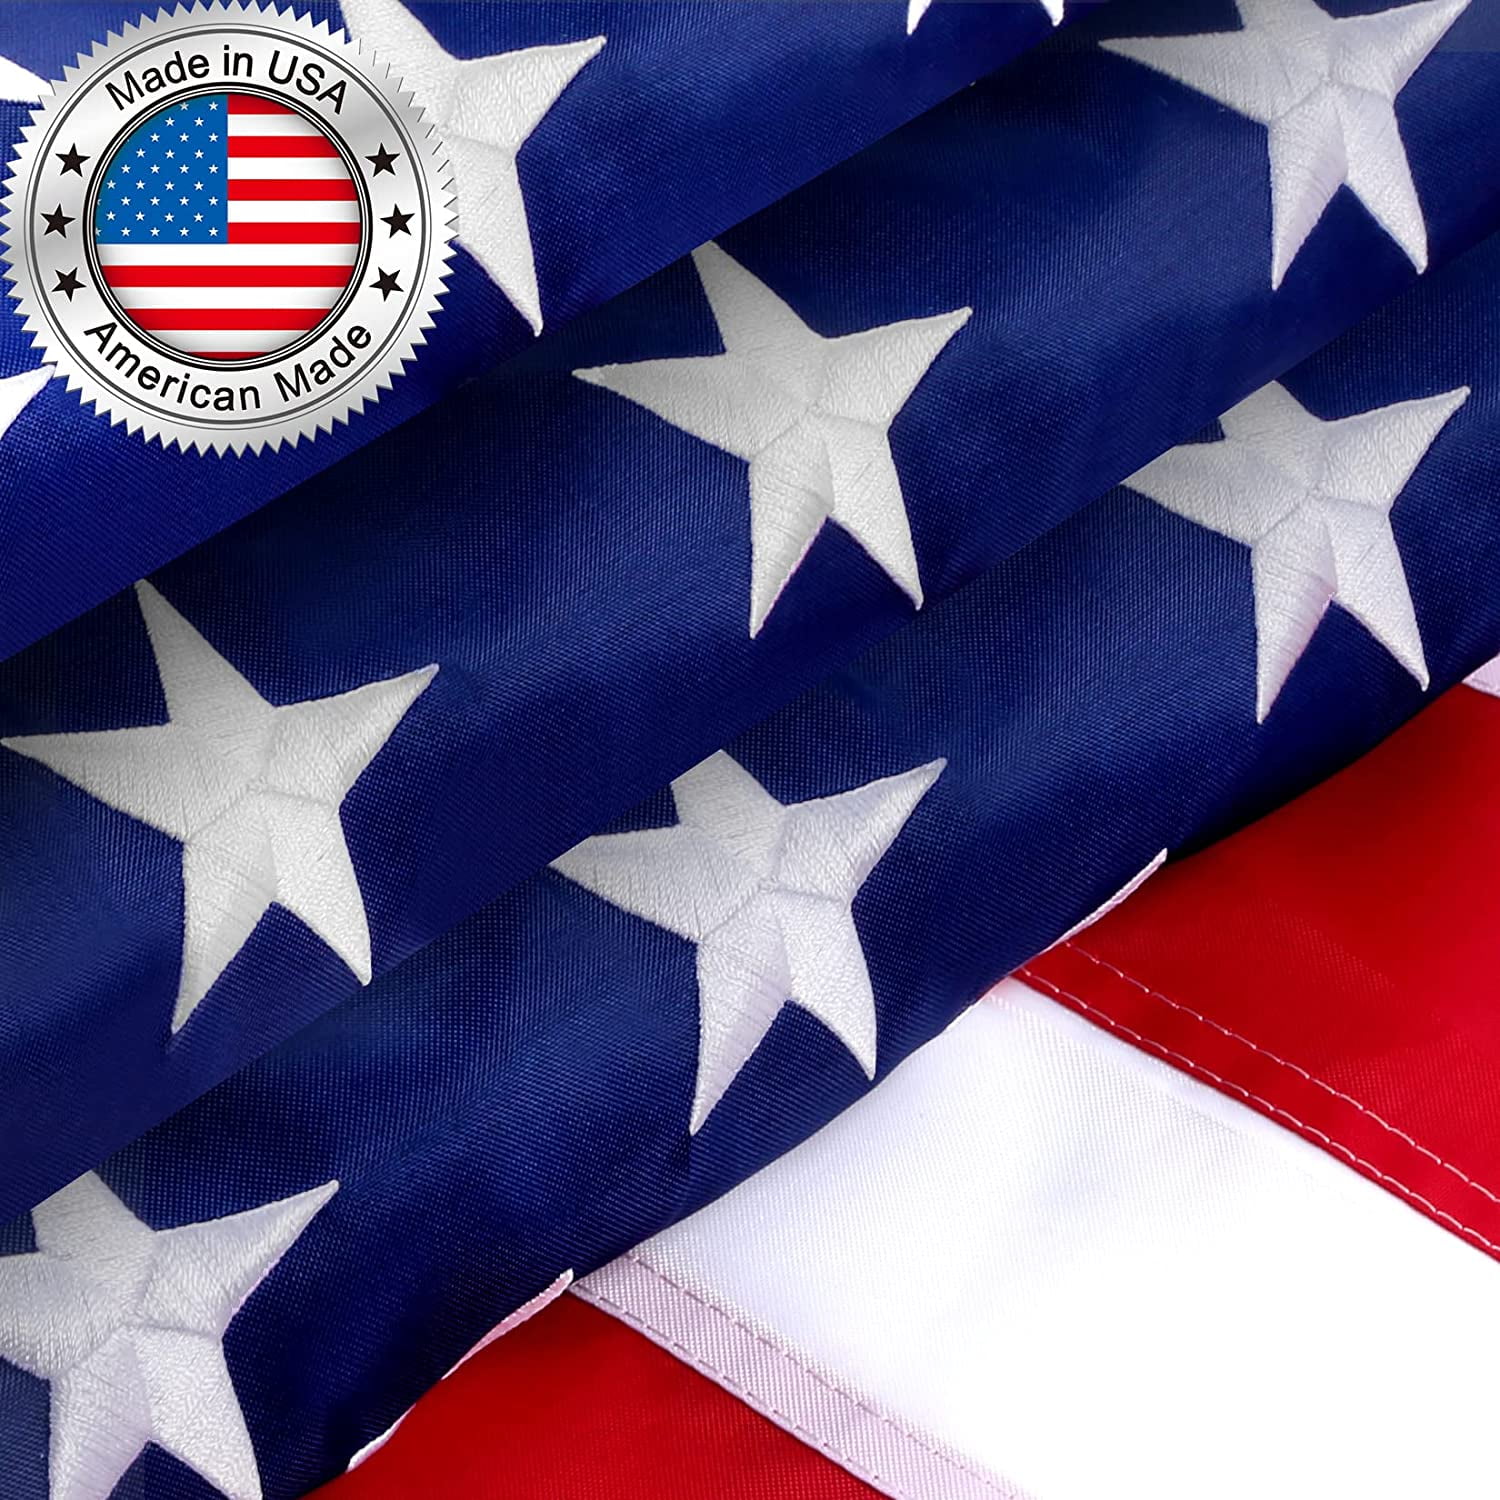 American Flag 3x5 Ft Durable Longest Lasting Spun Polyester 300d US USA Flags for sale online 